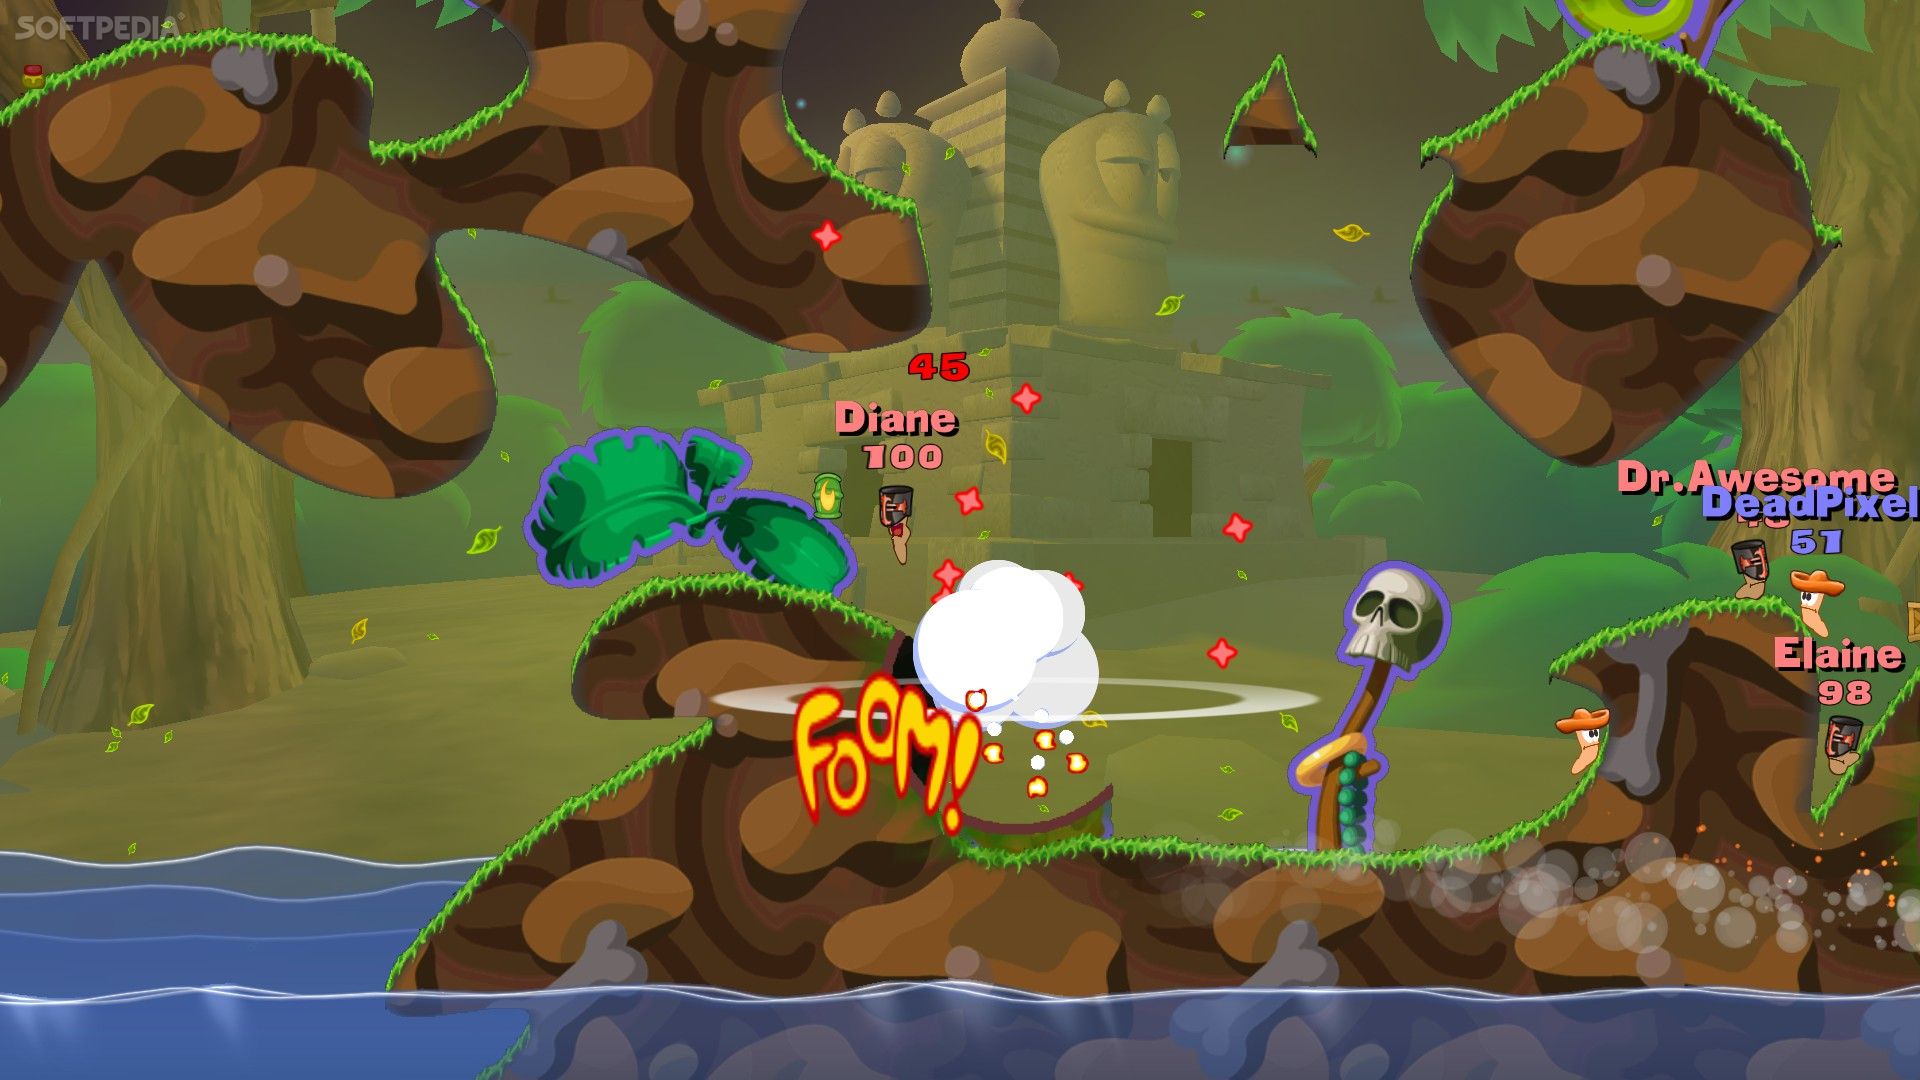 buy worms reloaded pc